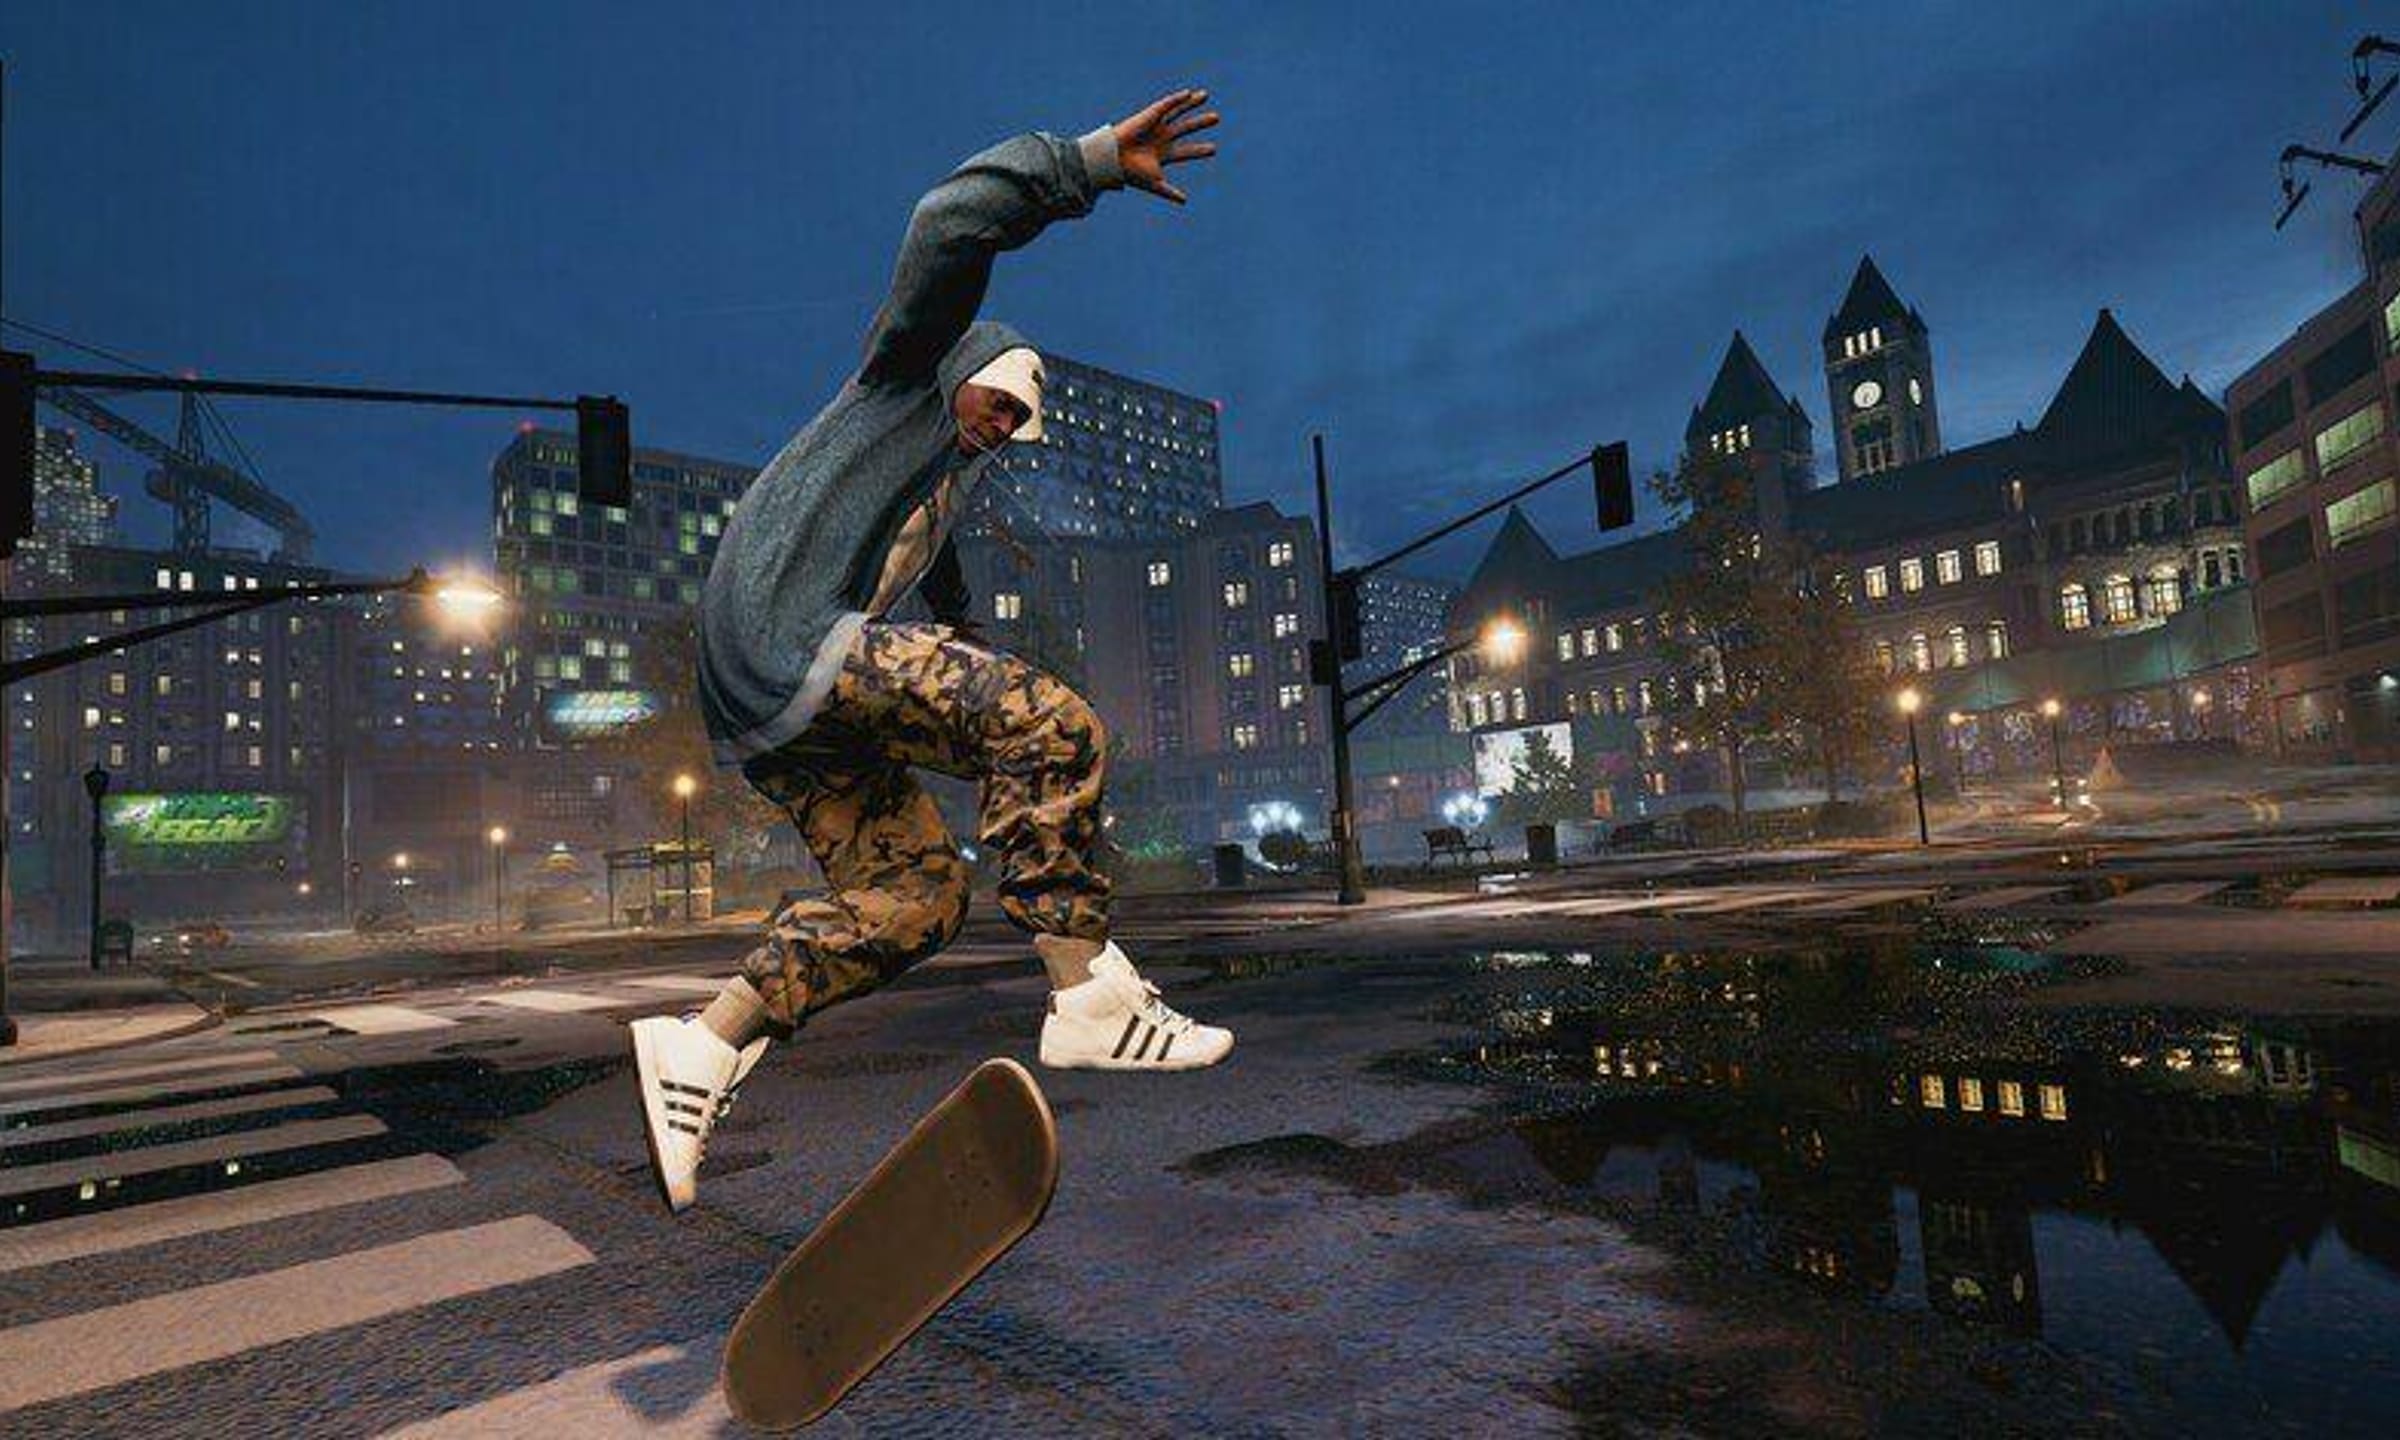 The Best Skateboarding Games List | Top Games in the 